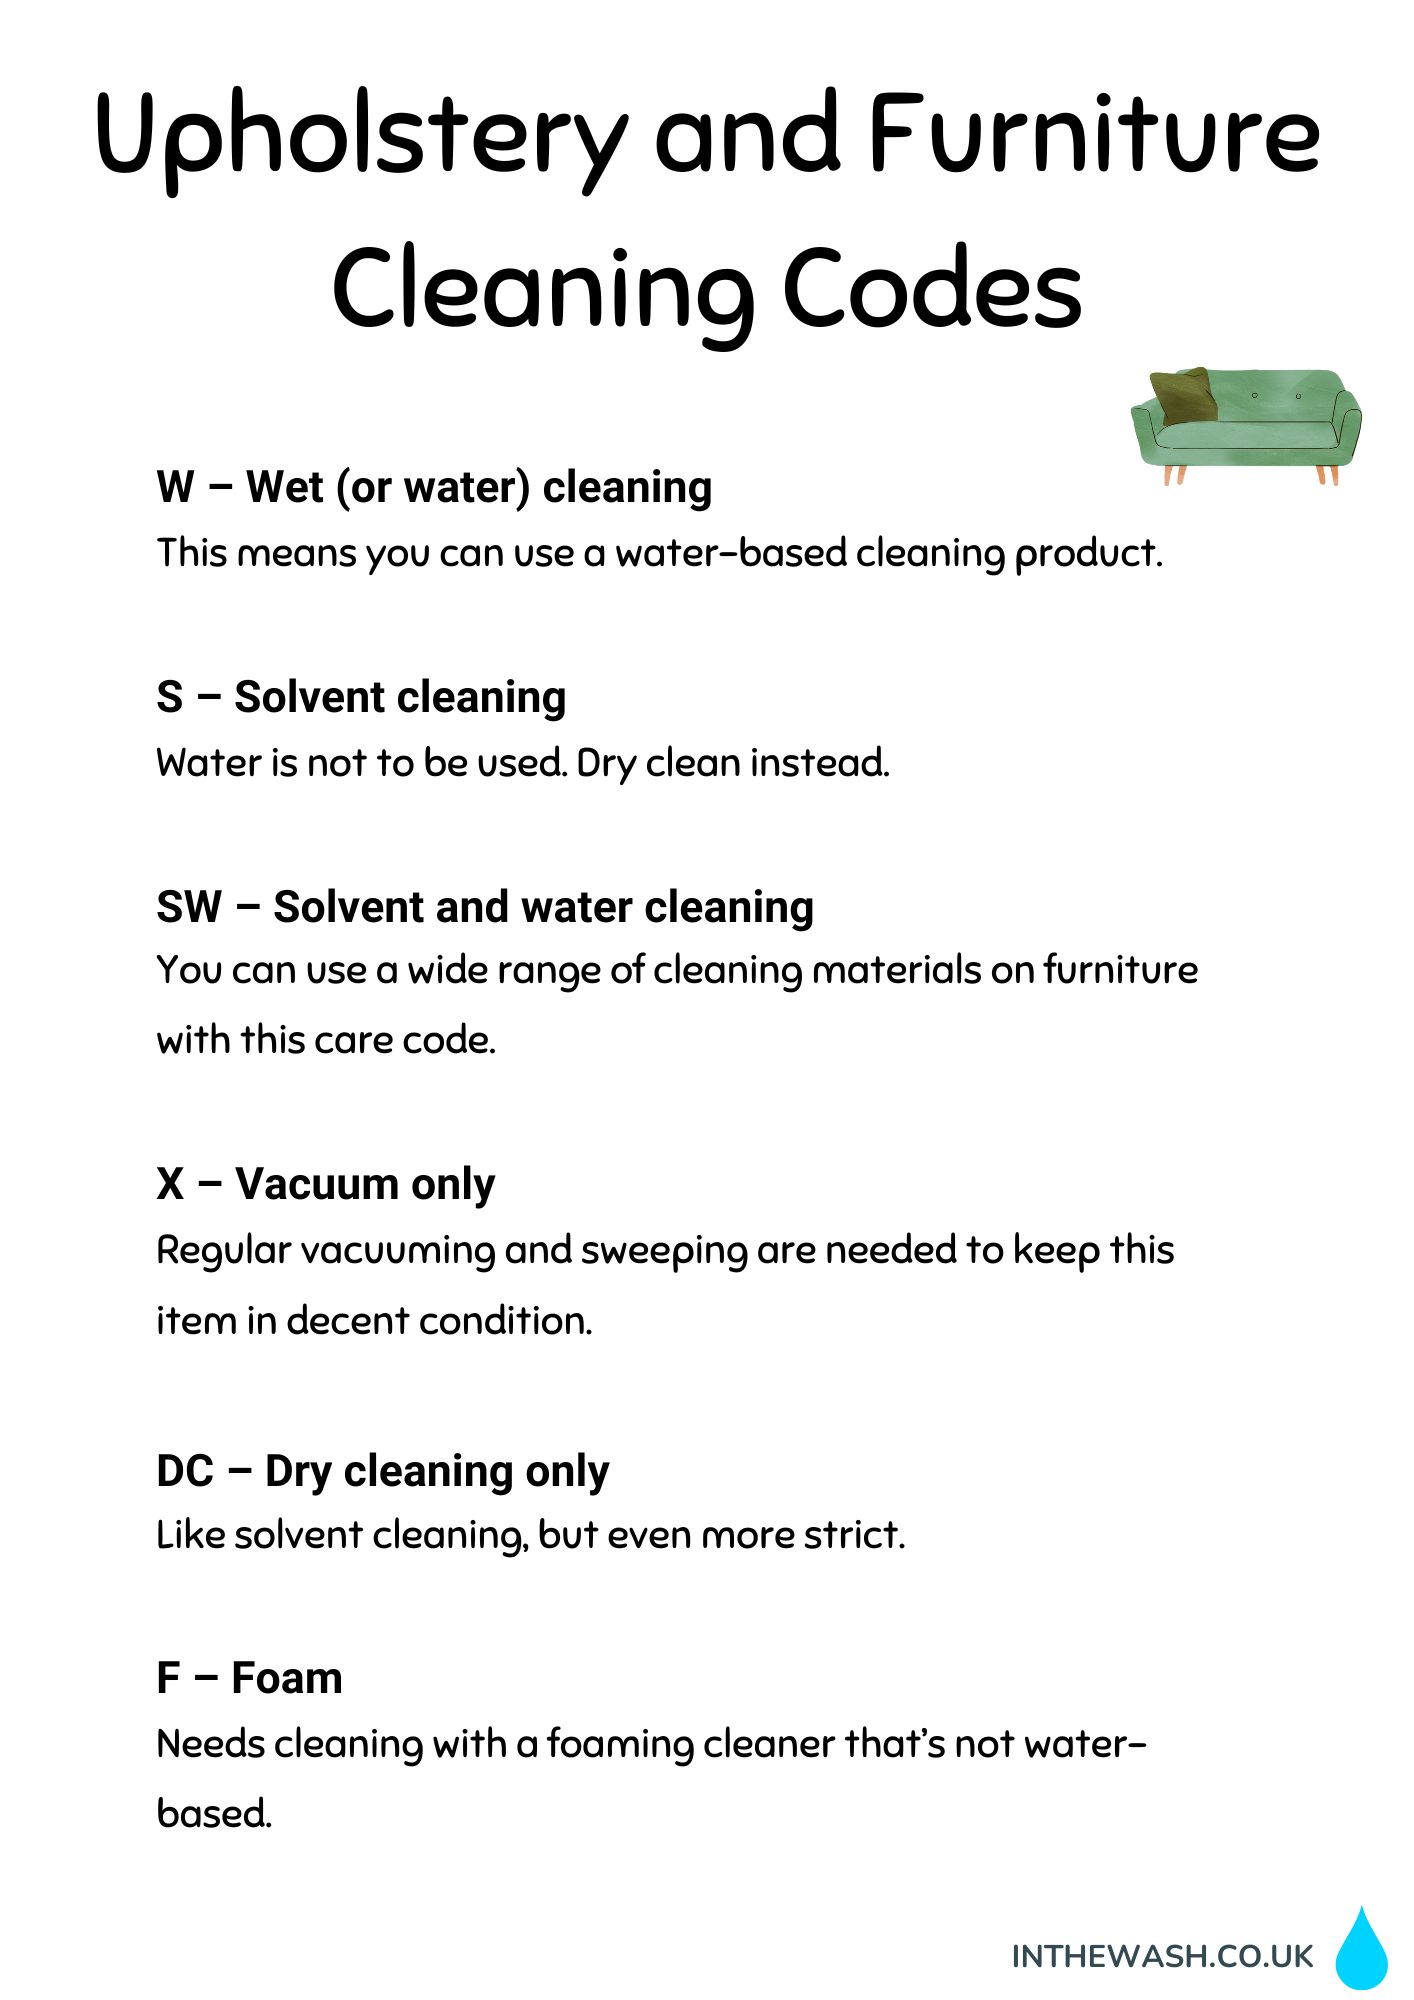 Upholstery and Furniture Cleaning Codes